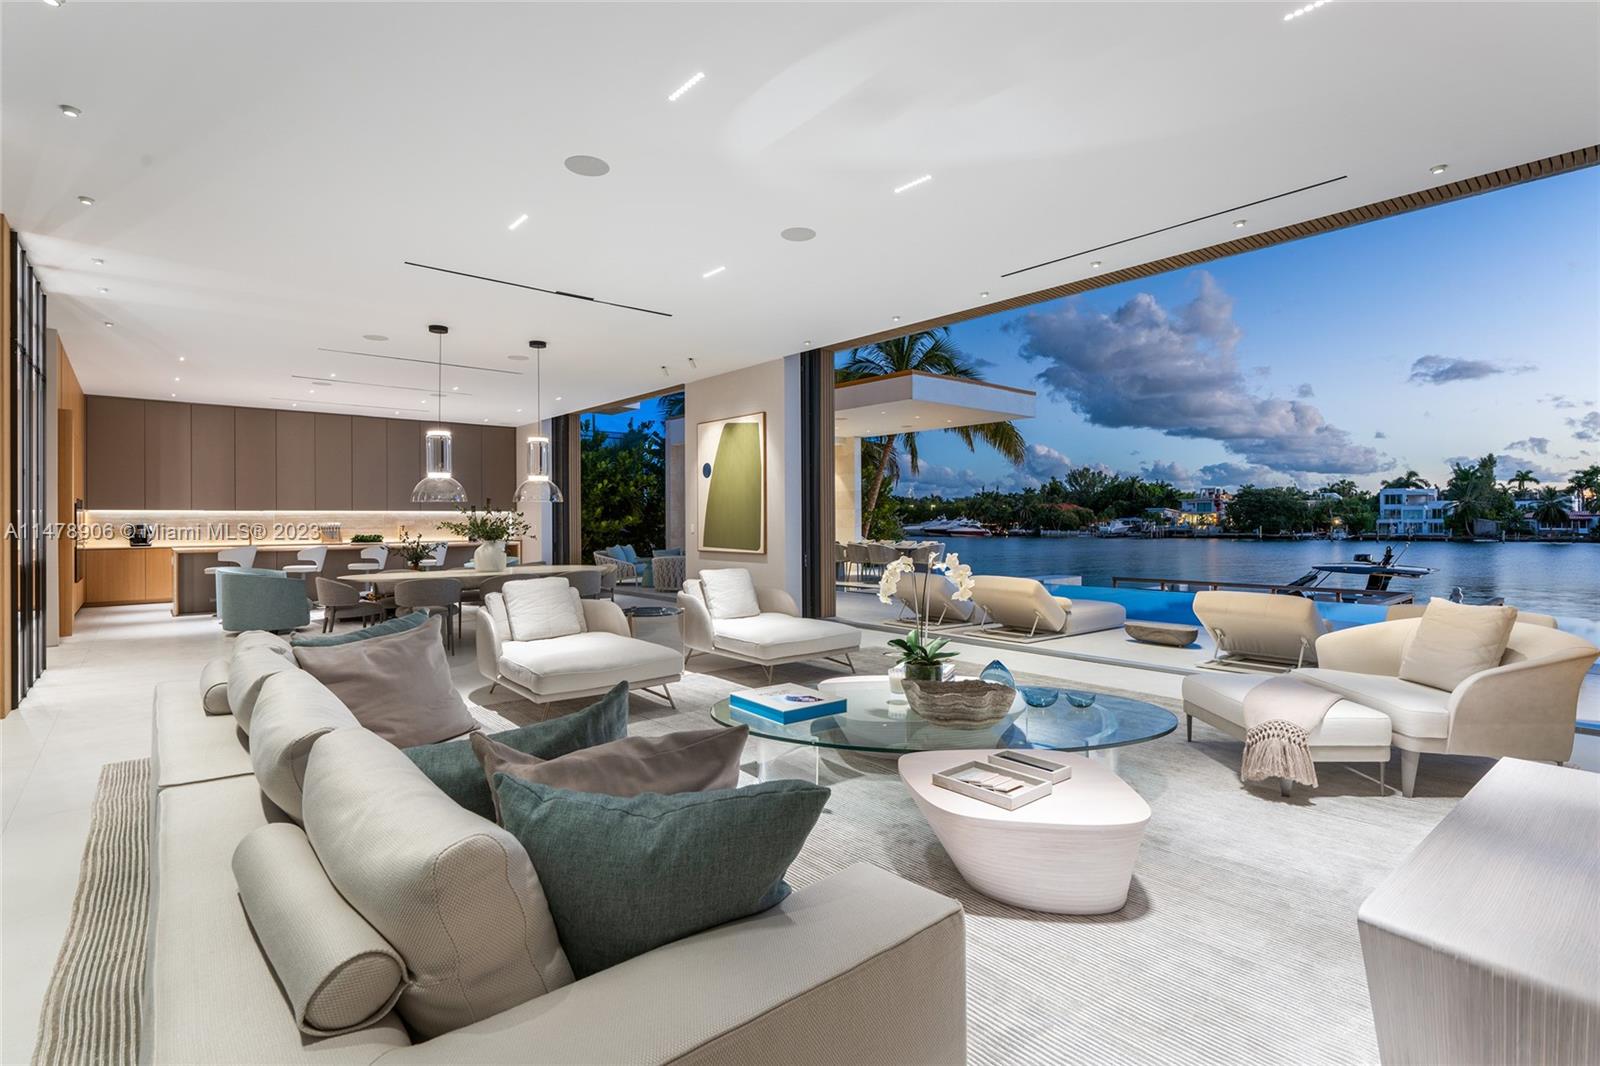 This 2-story, Ralph Choeff designed waterfront estate on guard-gated Hibiscus Island truly epitomizes luxury living in Miami Beach. Property boasts 7BR/7+1BA, sitting on a meticulously landscaped 15,750 SF lot, w/panoramic vistas of the iconic Miami skyline. Inside, the residence showcases impeccable interior design, soaring ceilings, & floor-to-ceiling telescoping glass doors that flood serene natural light while bringing the outdoors in. The expansive Great Room seamlessly integrates a family/media room, dining area, & chef's kitchen, all w/captivating water views. The 2nd story principal suite offers a terrace overlooking the waterway with city views and a beautiful plunge pool/spa. Outdoor spaces are a tropical oasis w/infinity pool, private dock for large vessels & easy ocean access.